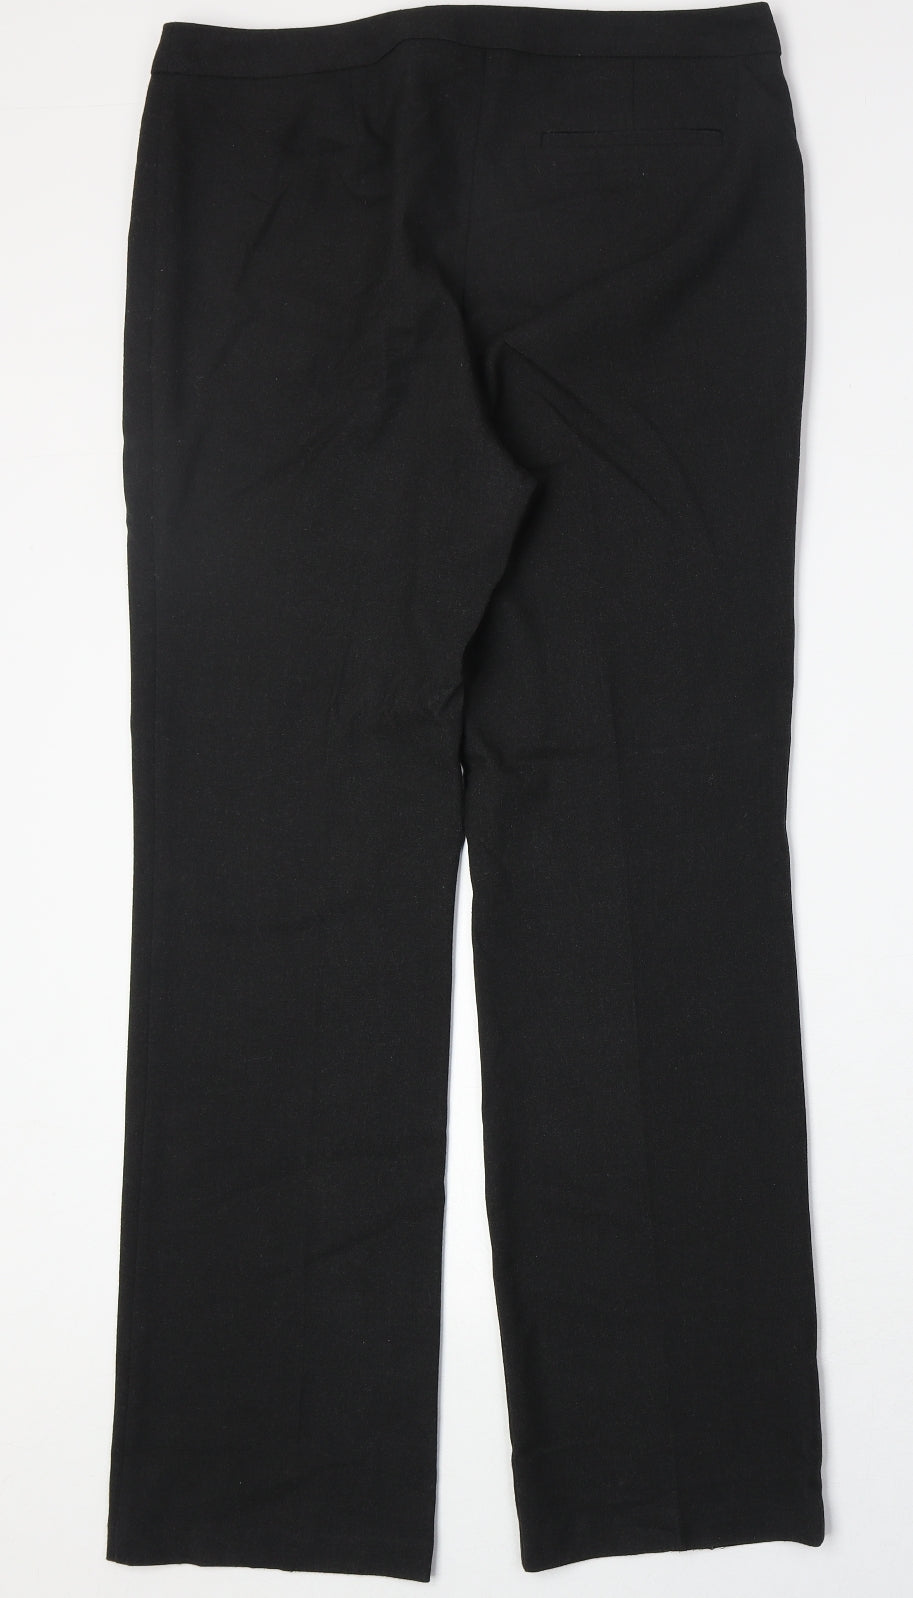 Marks and Spencer Womens Grey Polyester Trousers Size 12 Regular Zip